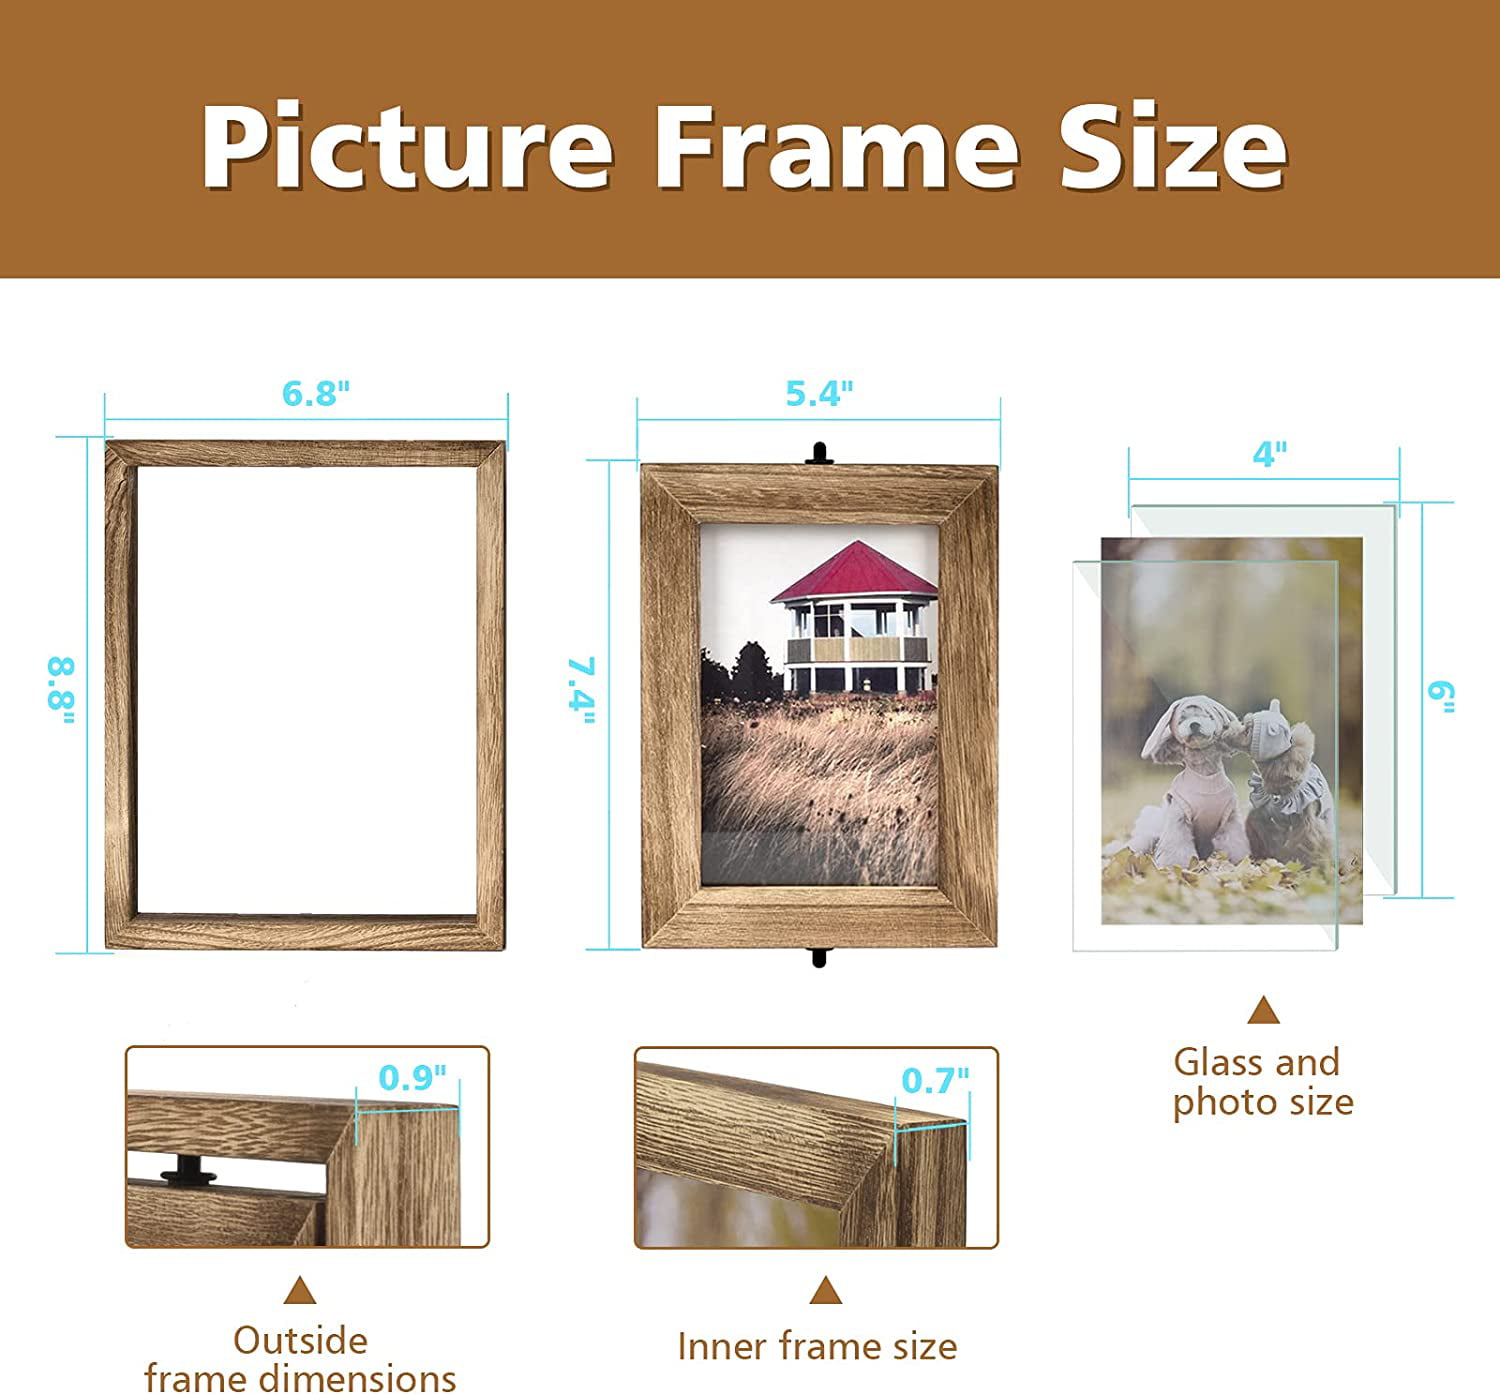 POILKMNI 4 Folding 4x6 inch Hinged Picture Frame, High Definition Natural Wood Picture Frame, Rustic Desktop Acrylic Frame Family Photo Collage for